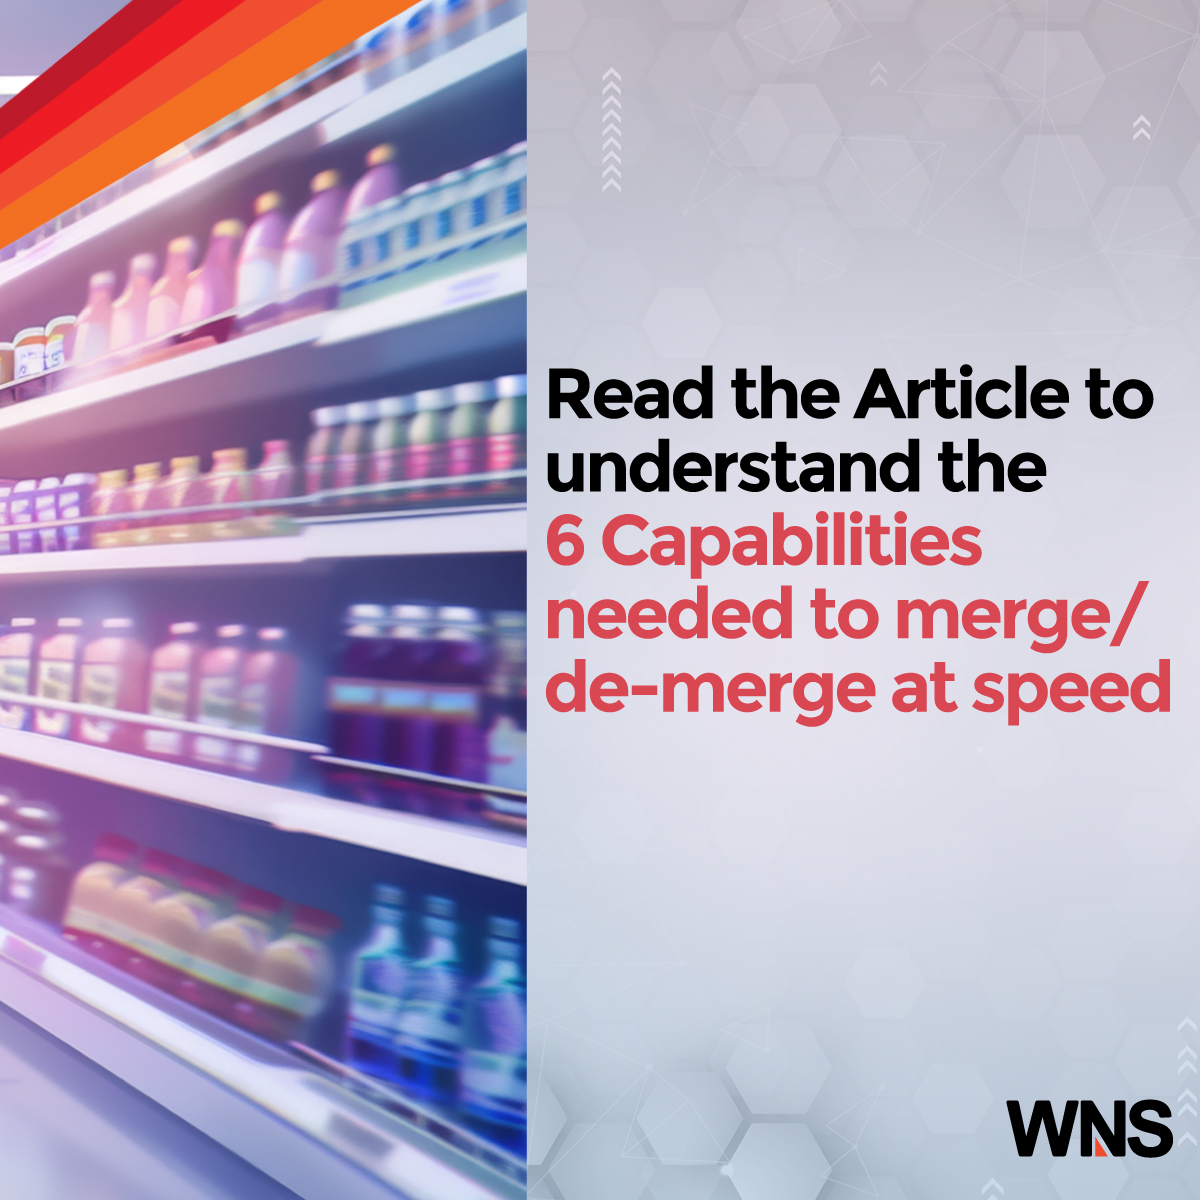 In the fast-paced world of Consumer Packaged Goods, bolt-on #acquisitions can fuel innovation and growth. However, with the complexity of M&A, how can #CPG leaders ensure seamless integration? Discover the six capabilities needed for success: bit.ly/PF1-T